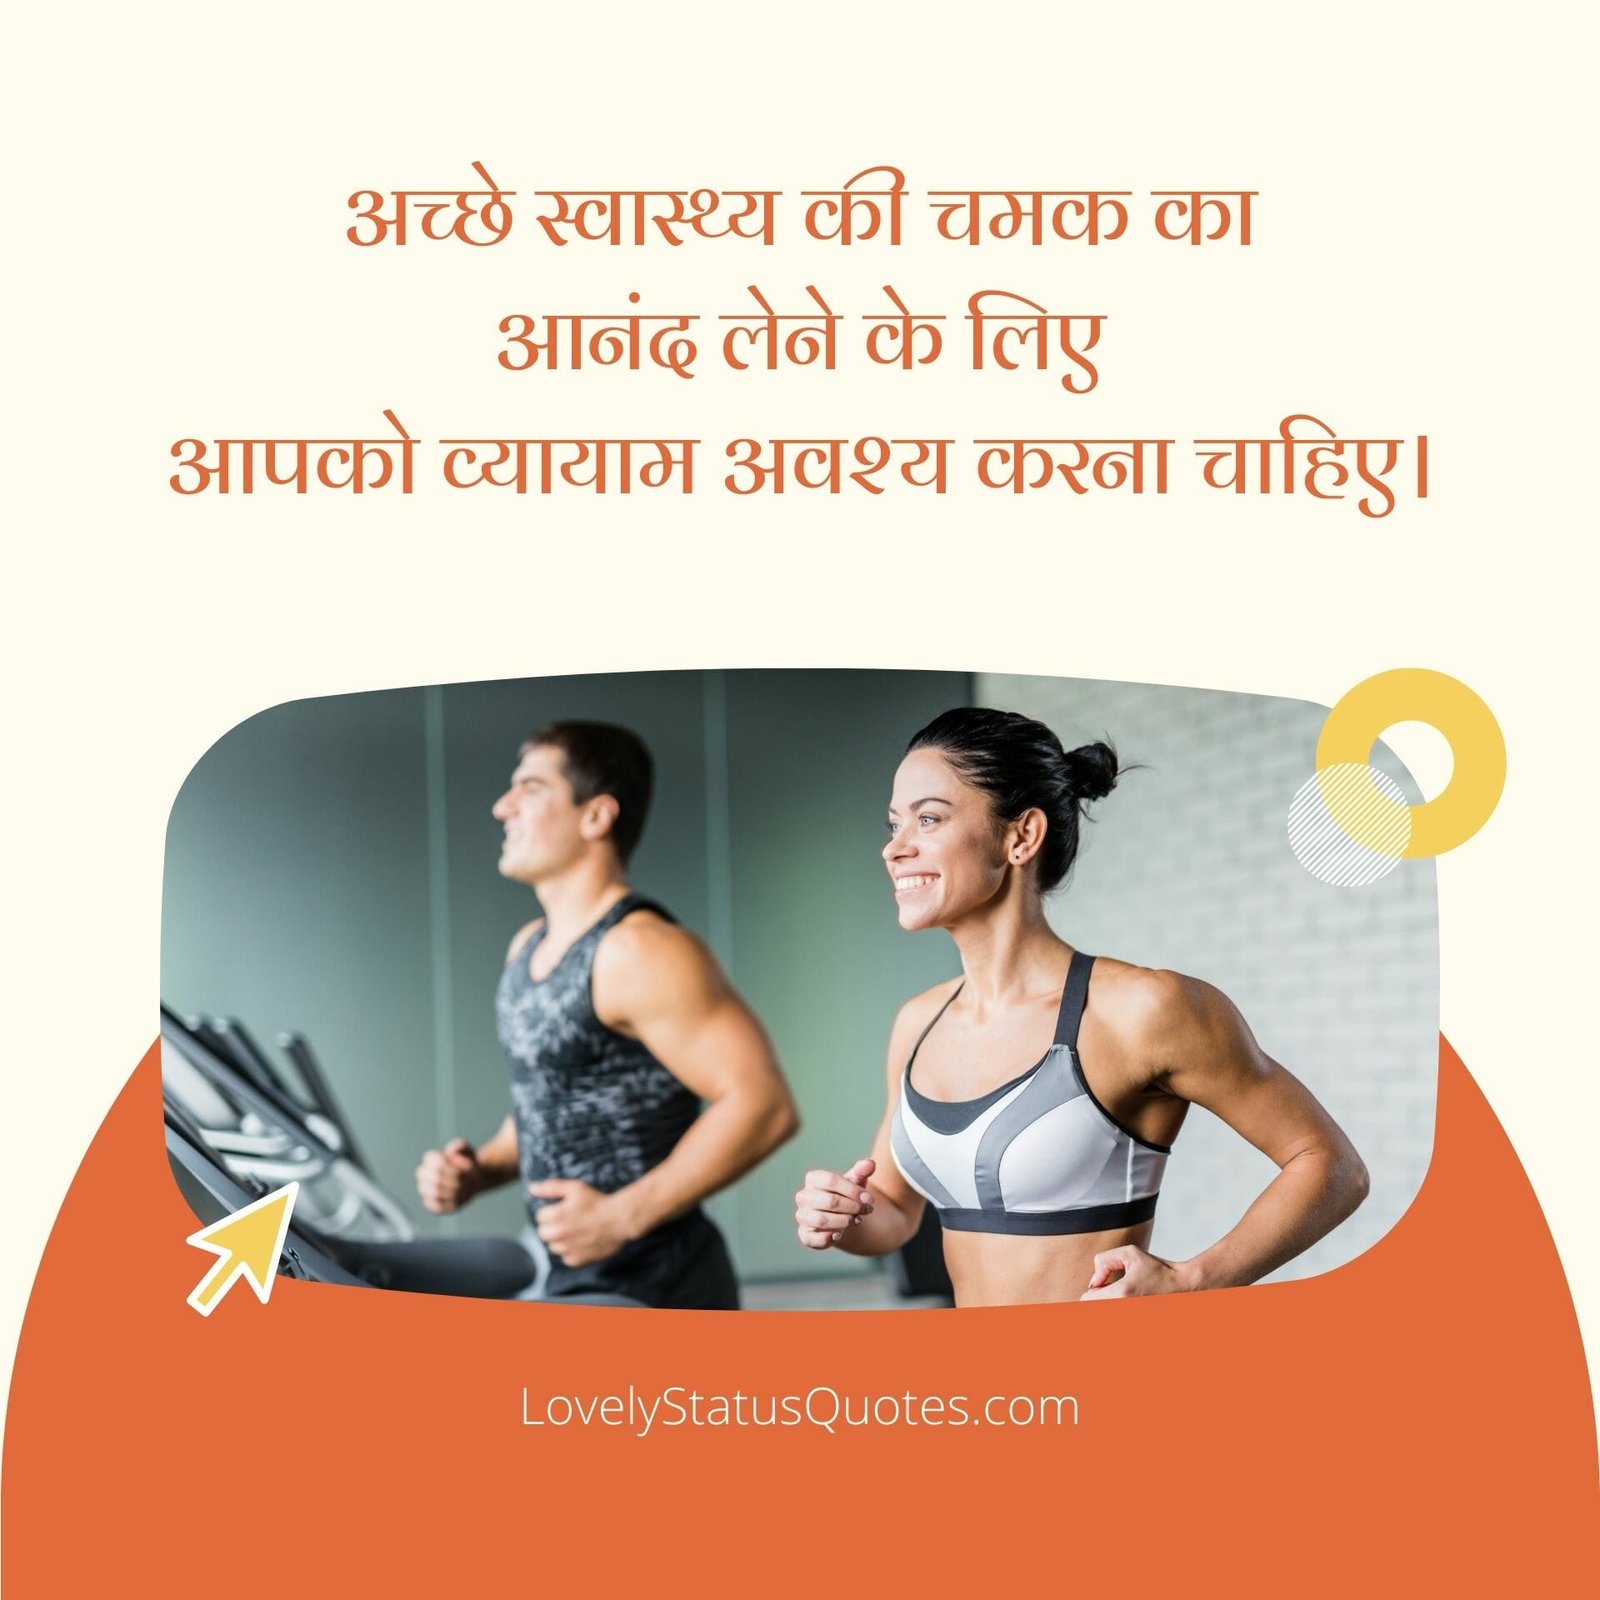 weight loss motivational quotes in hindi, Weight loss motivation Image